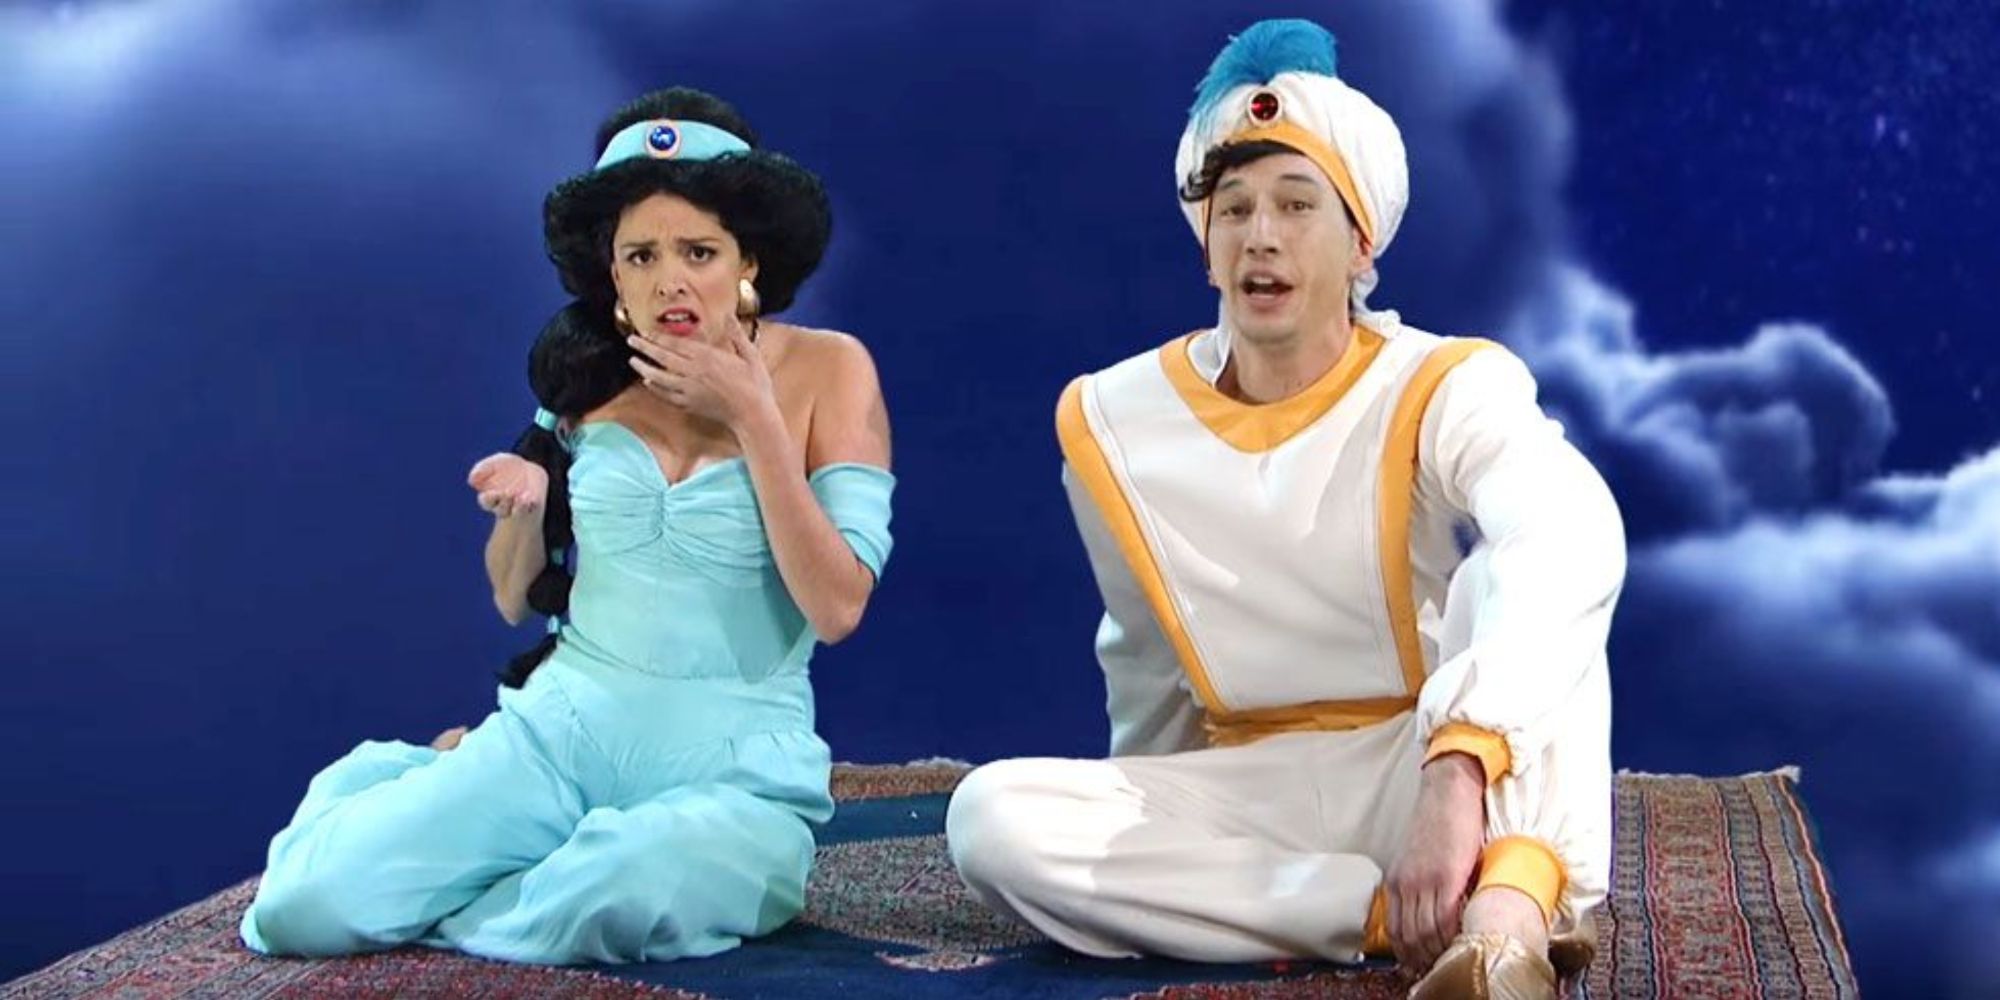 Cecily Strong comme Jasmine sur SNL